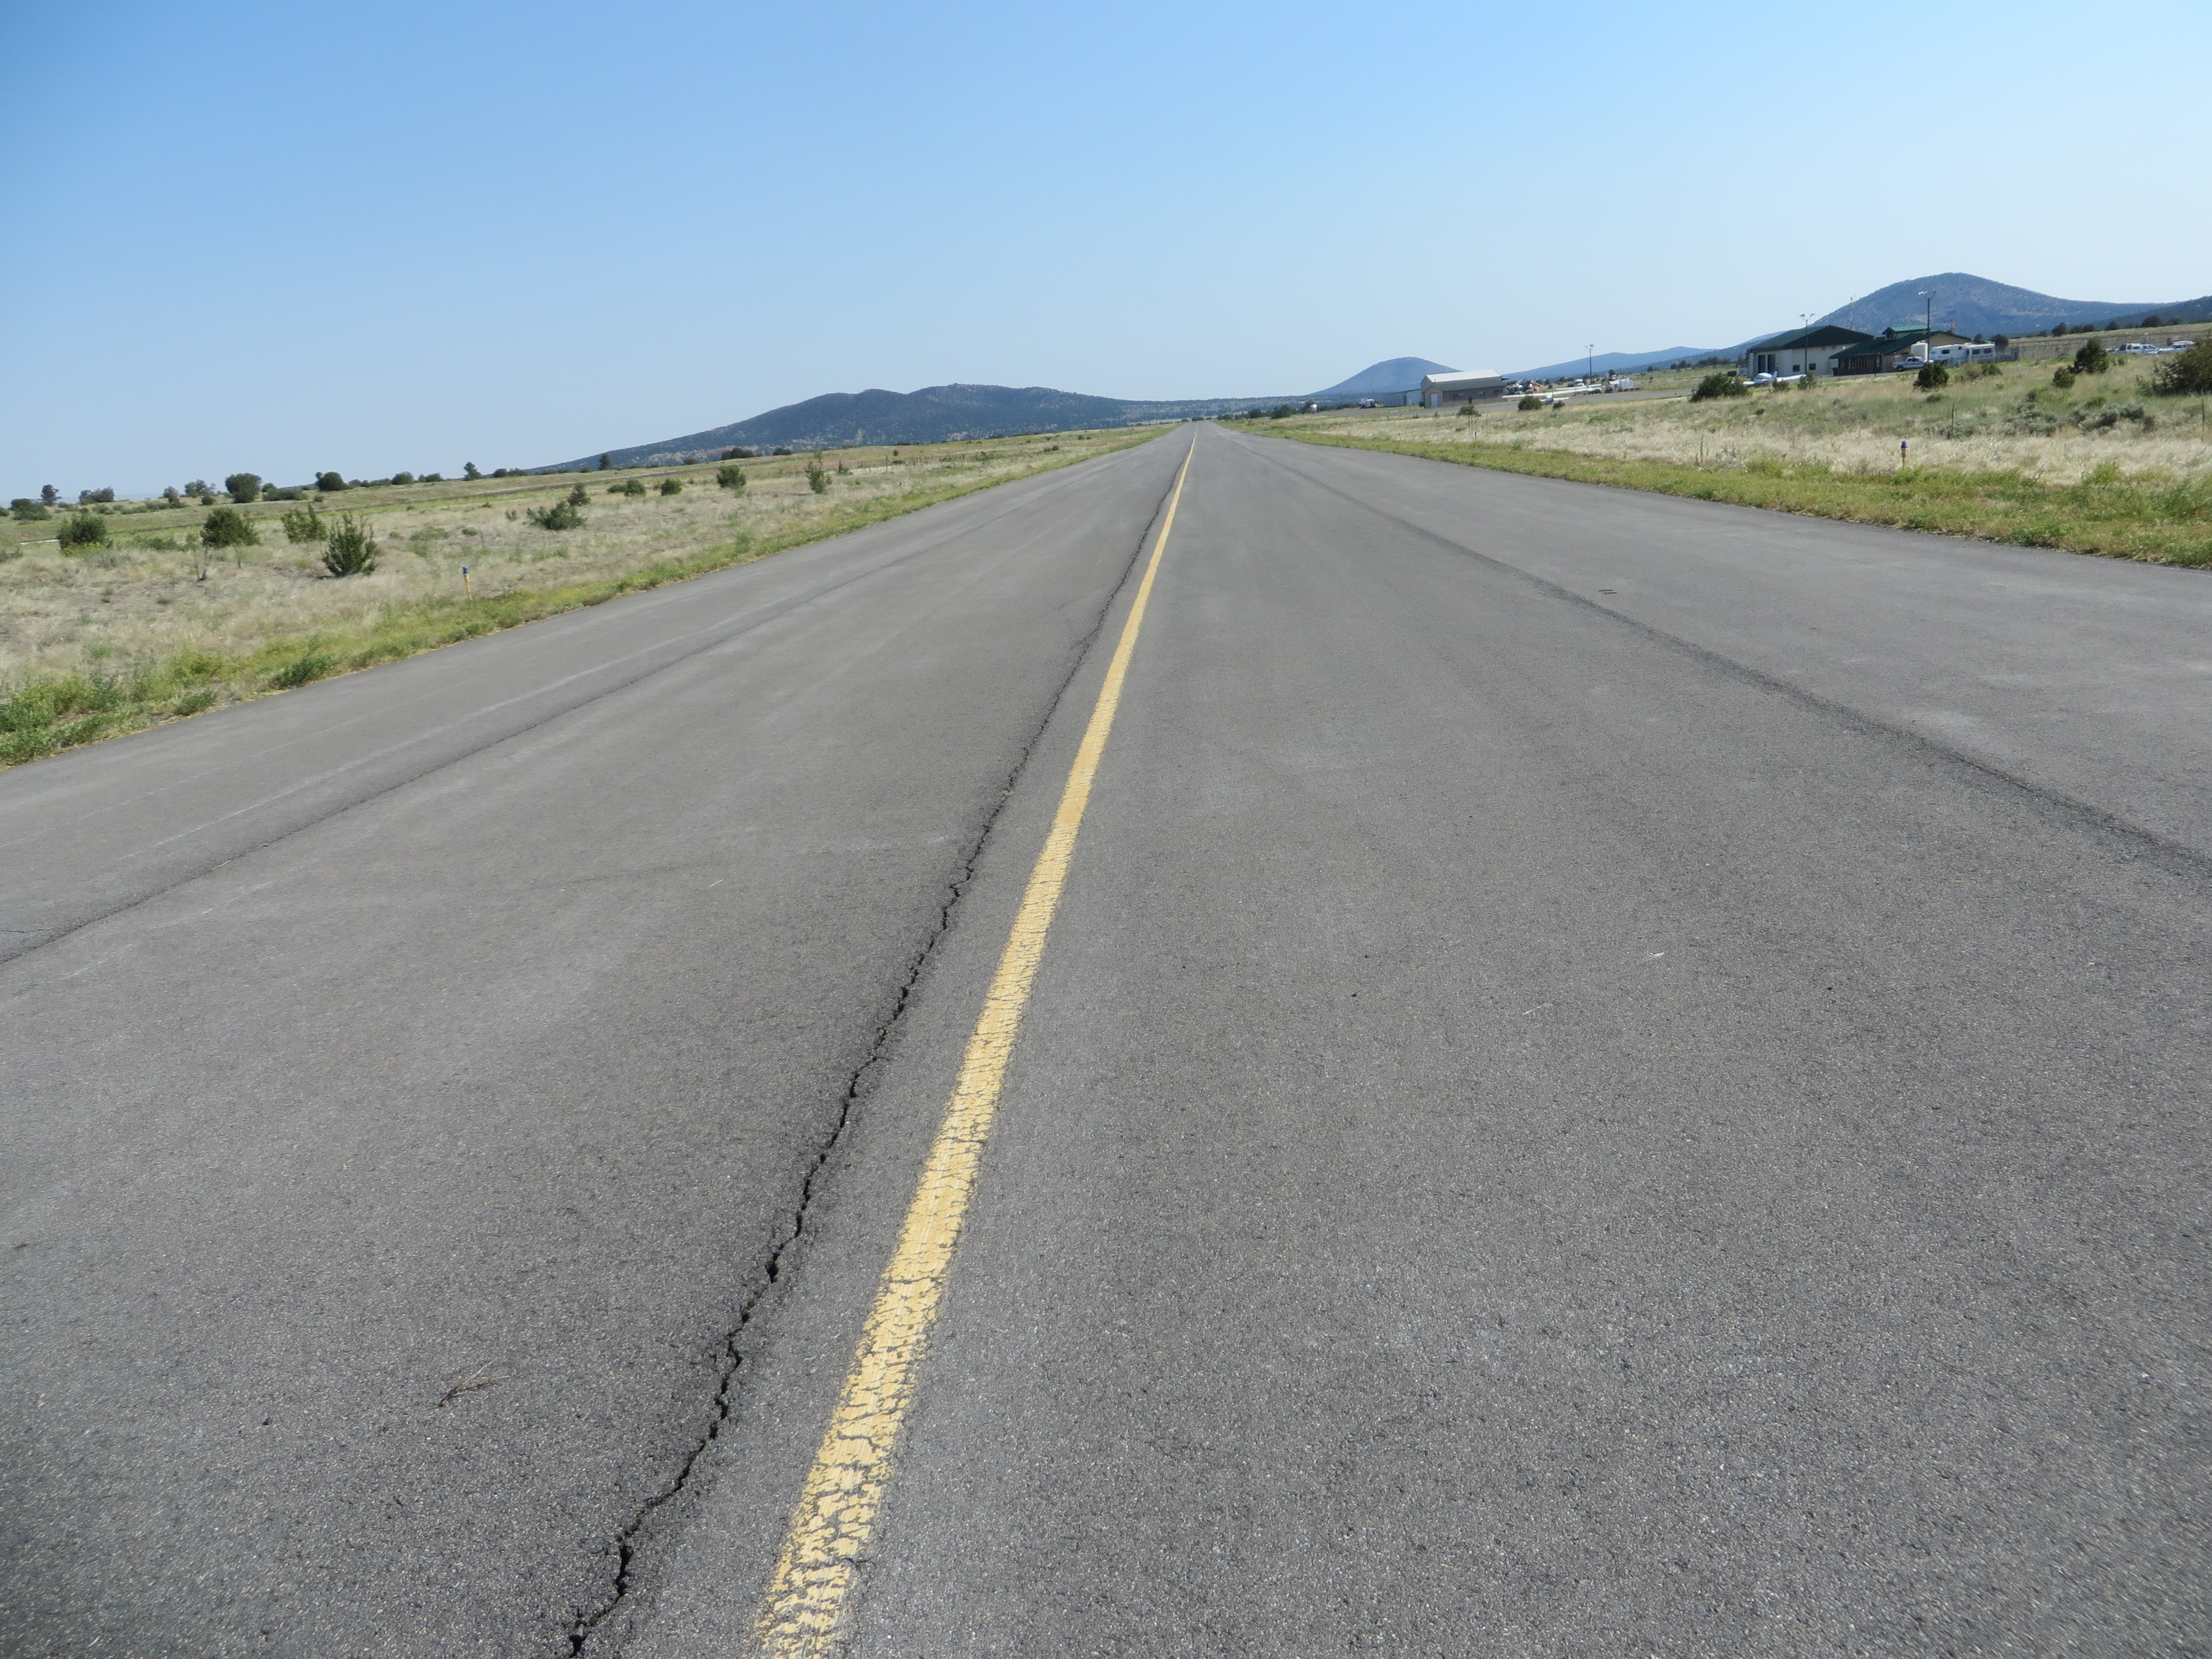 This picture shows an asphalt runway pavement with a single longitudinal paving joint crack.  The PCI of the pavement in the image is 90.